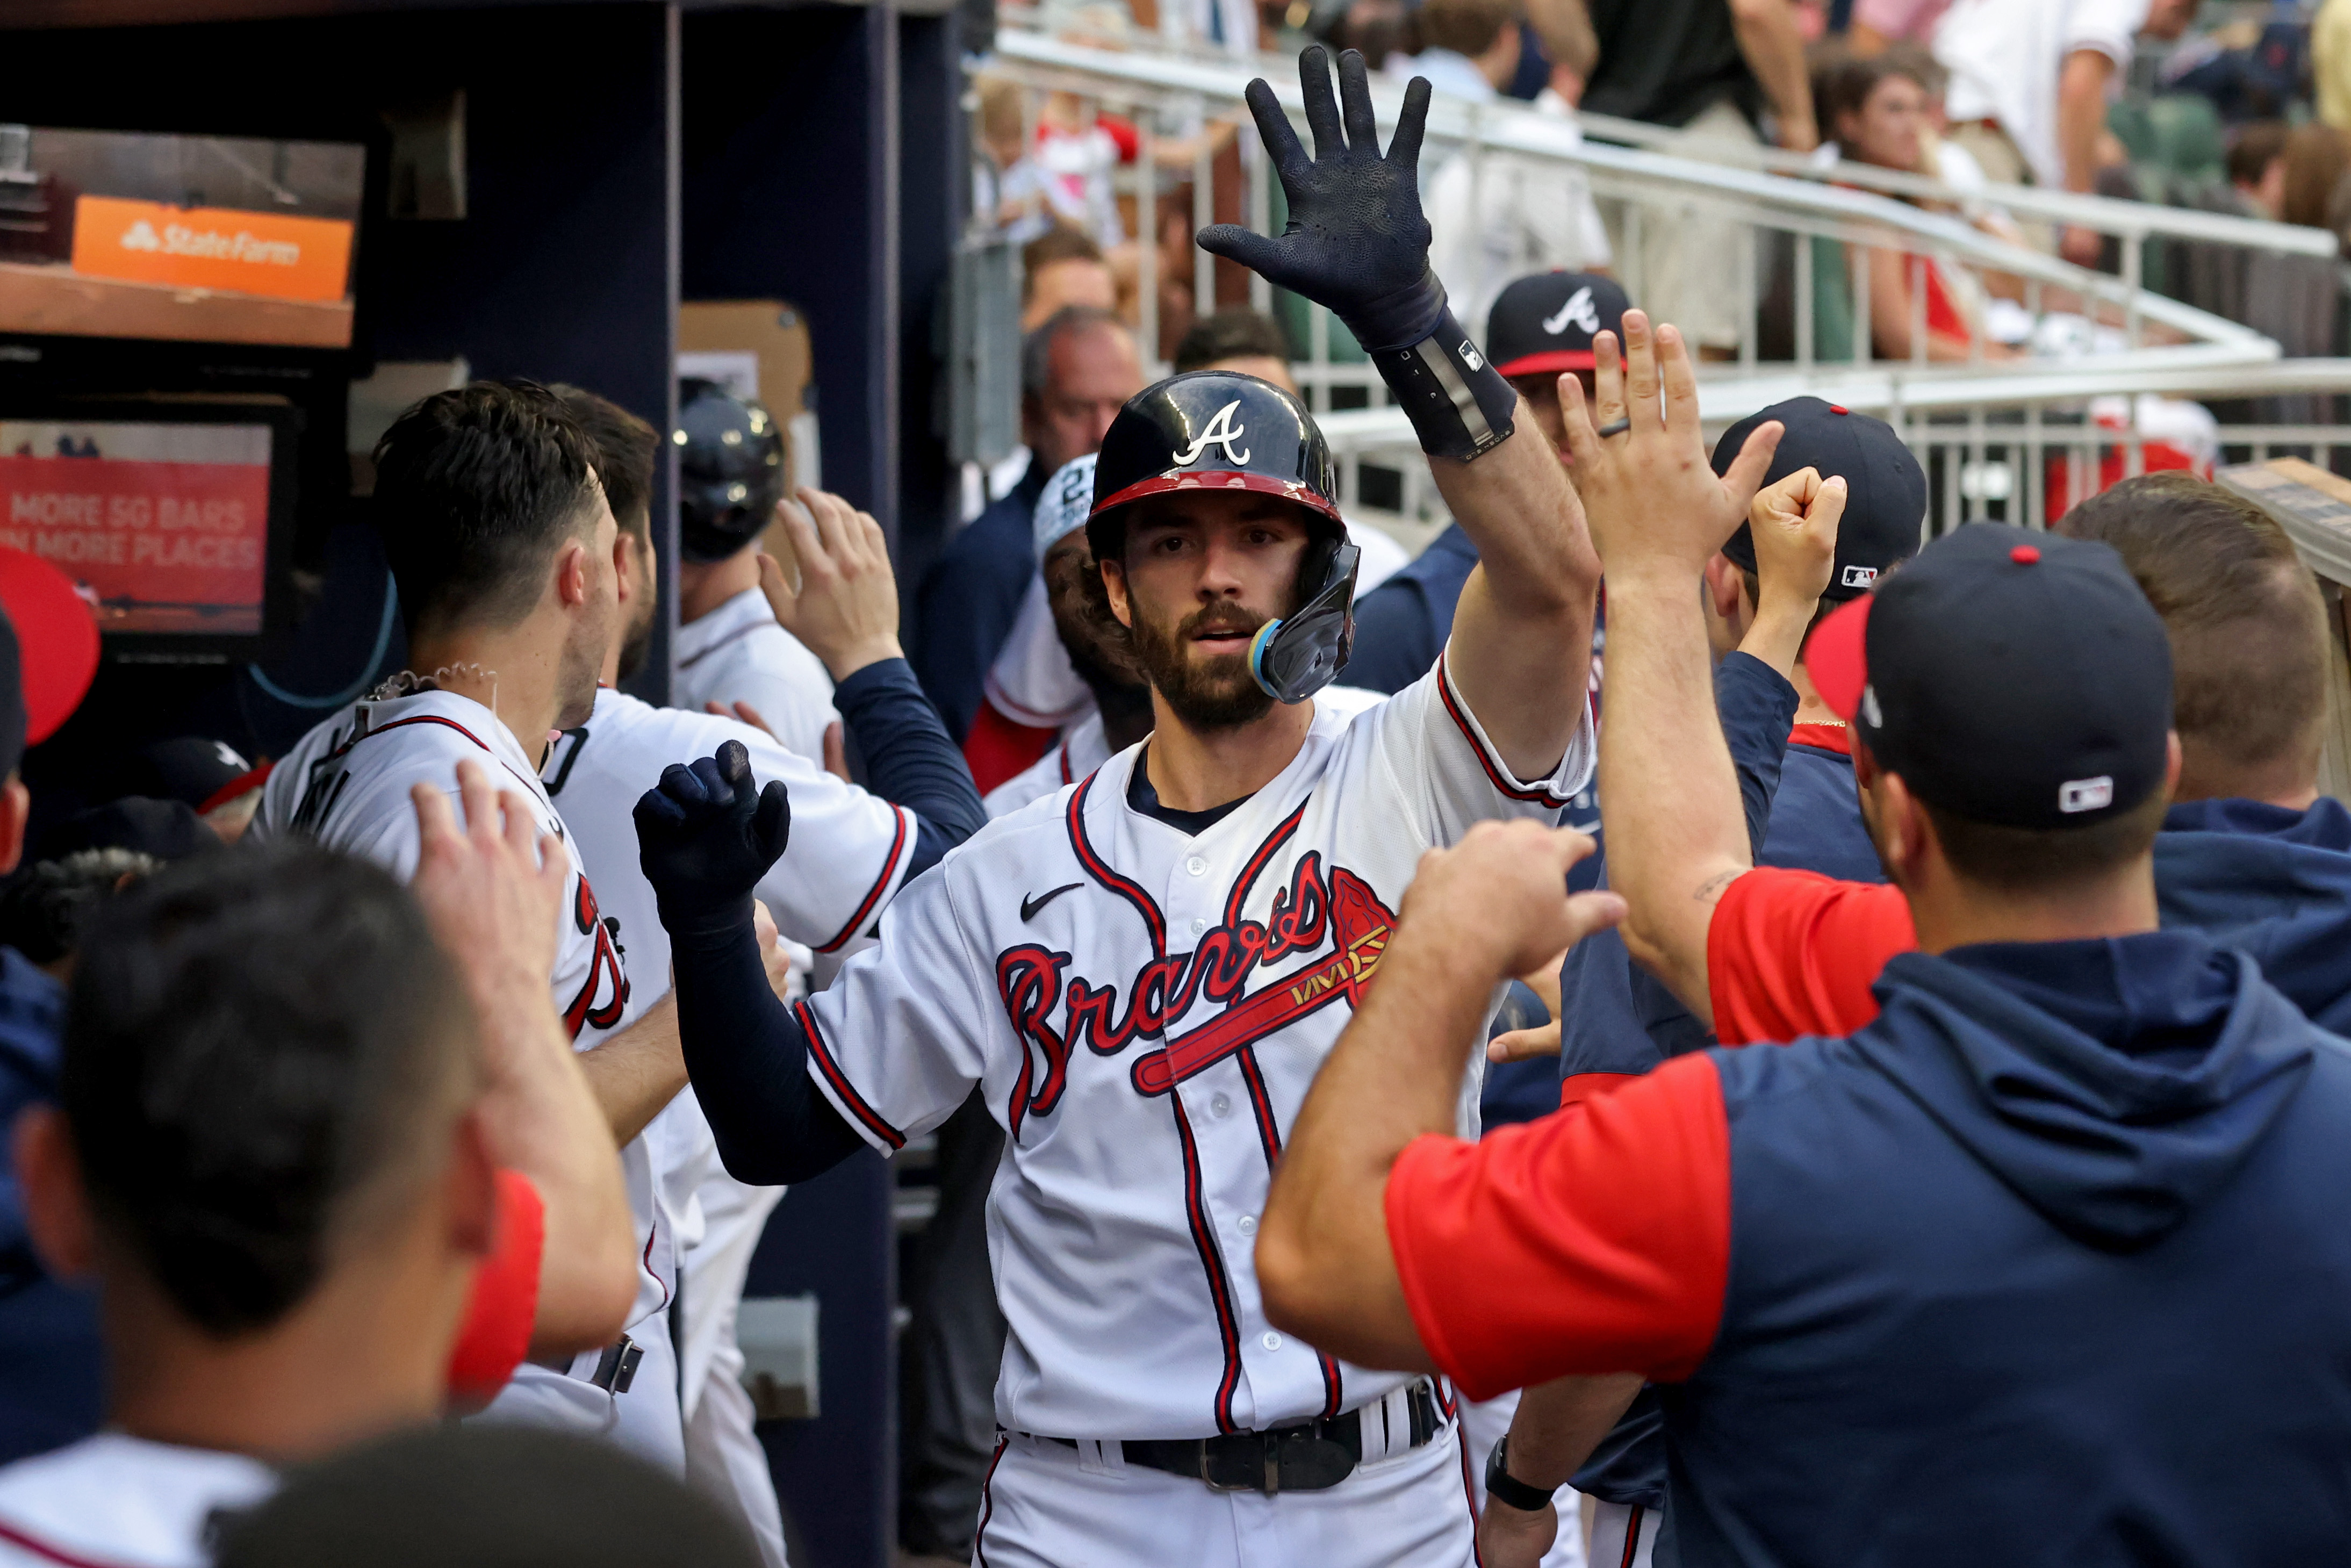 Dansby Swanson arrives, a ray of hope after Braves' razing of roster